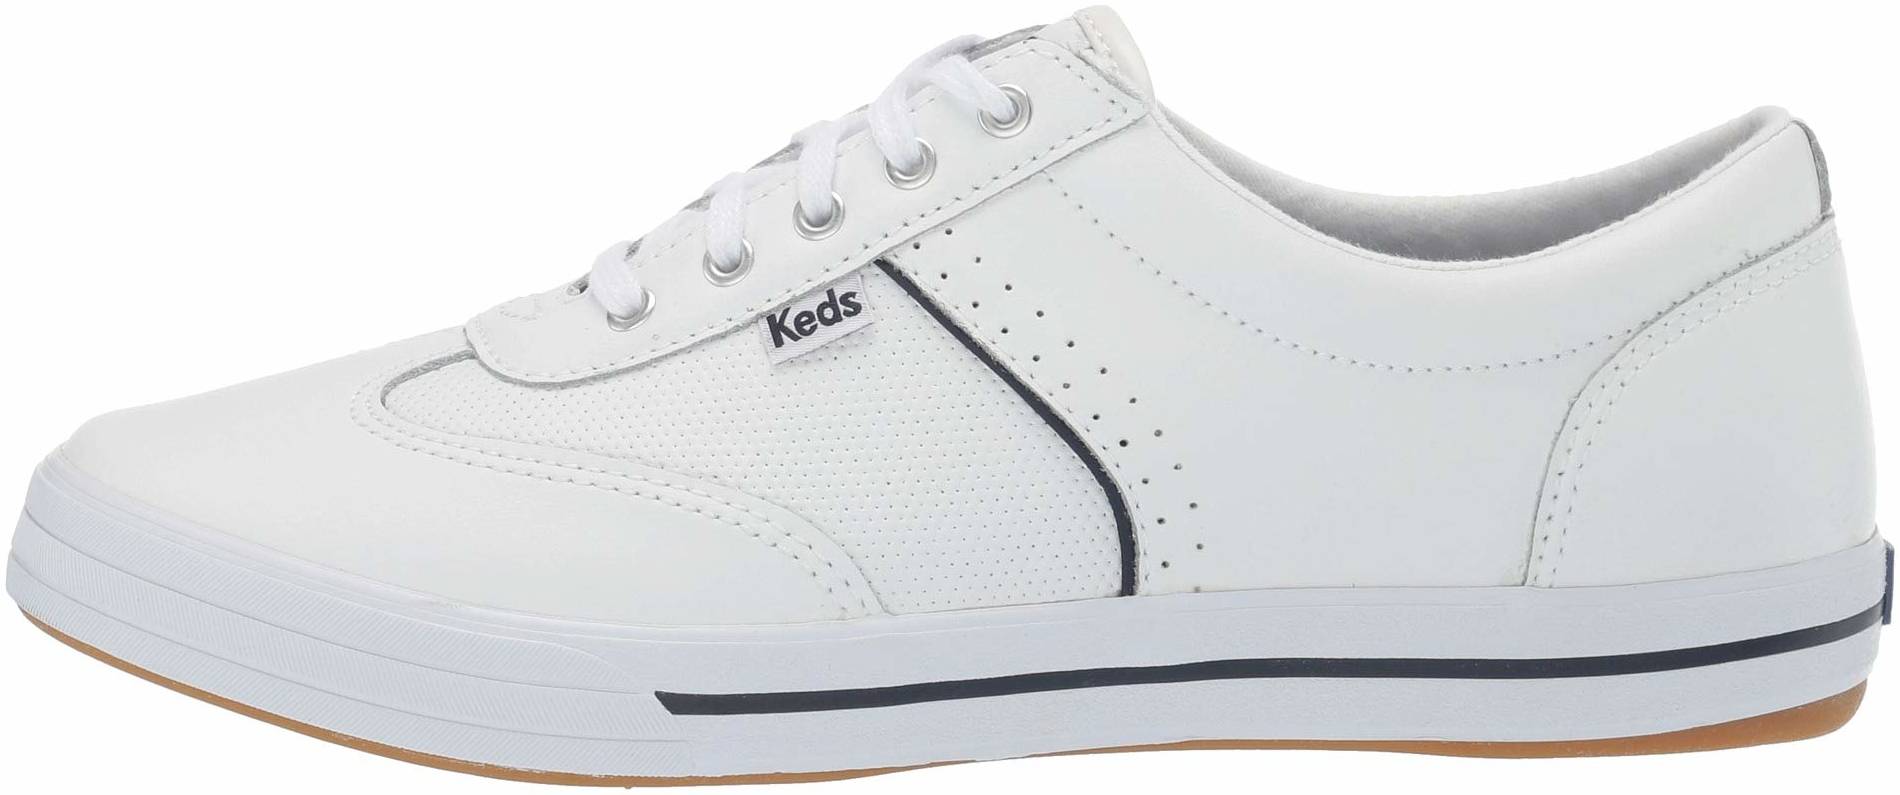 Keds Womens Courty Sneaker